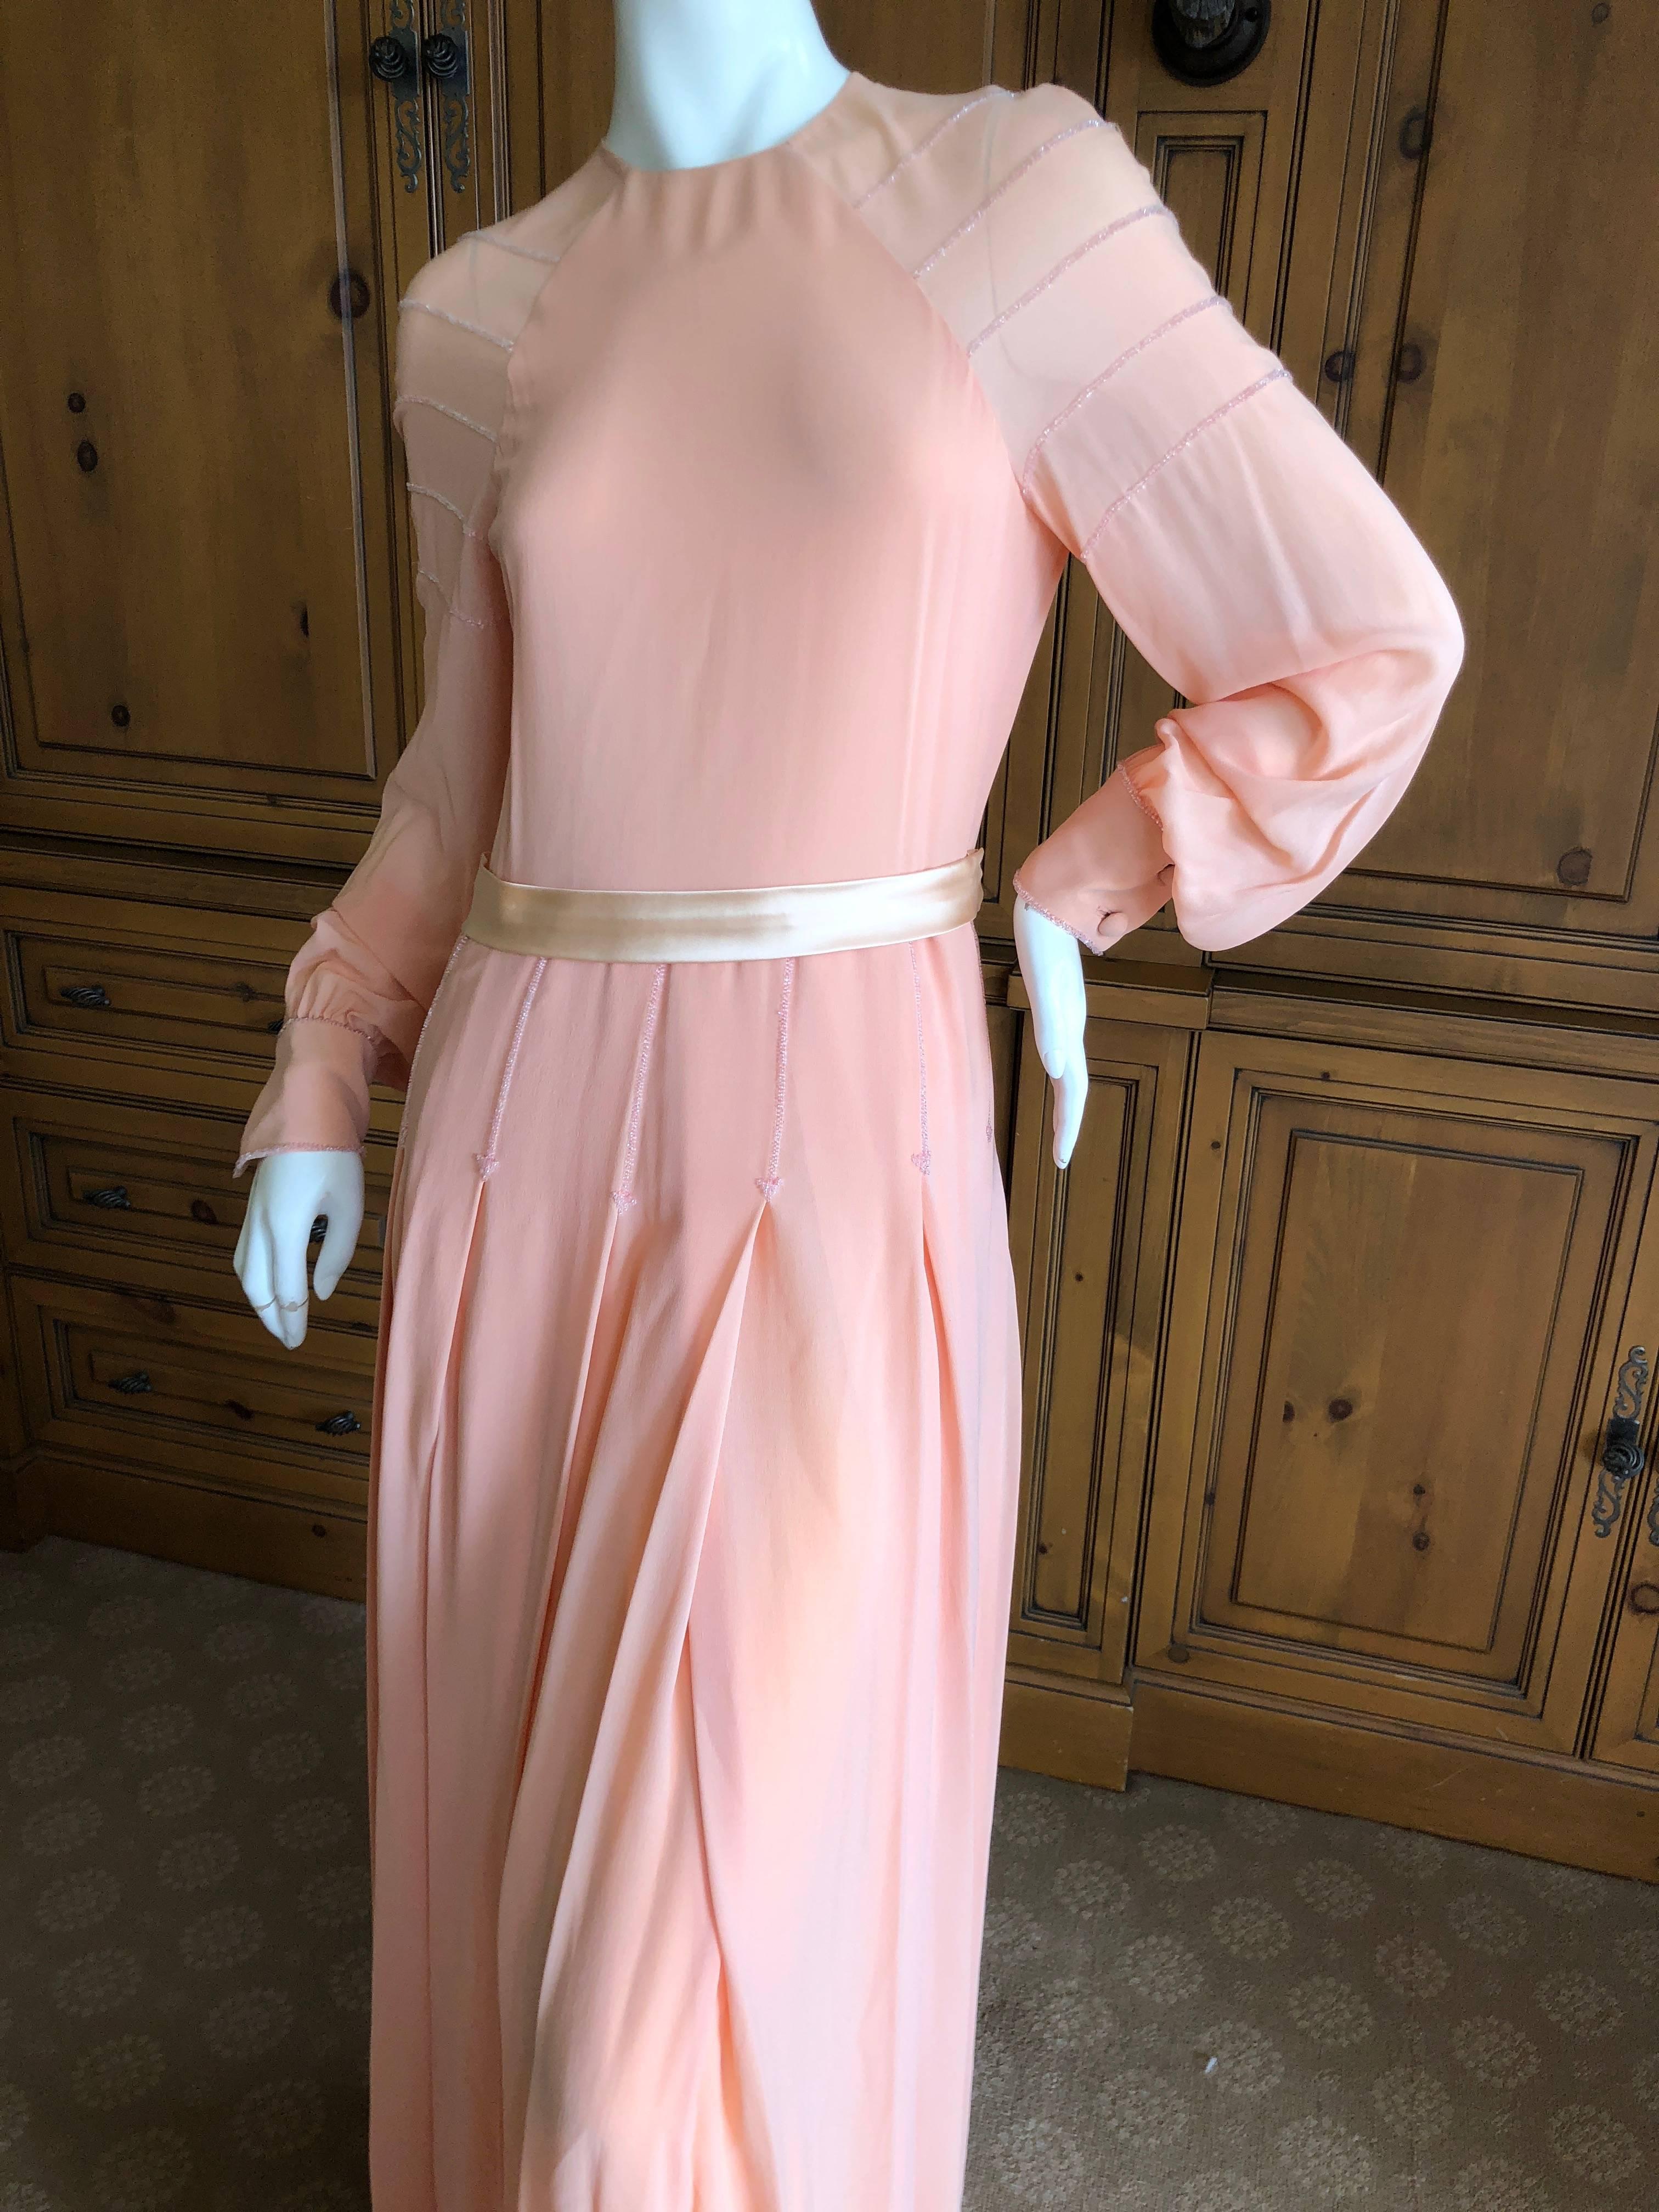 Cardinali 1970's Apricot Chiffon Beaded Evening Dress

From the Archive of Marilyn Lewis, the creator of Cardinali
Cardinali was founded in Los Angeles in 1970, by Marilyn Lewis, who had already found success as the founder and owner of the hot 60's